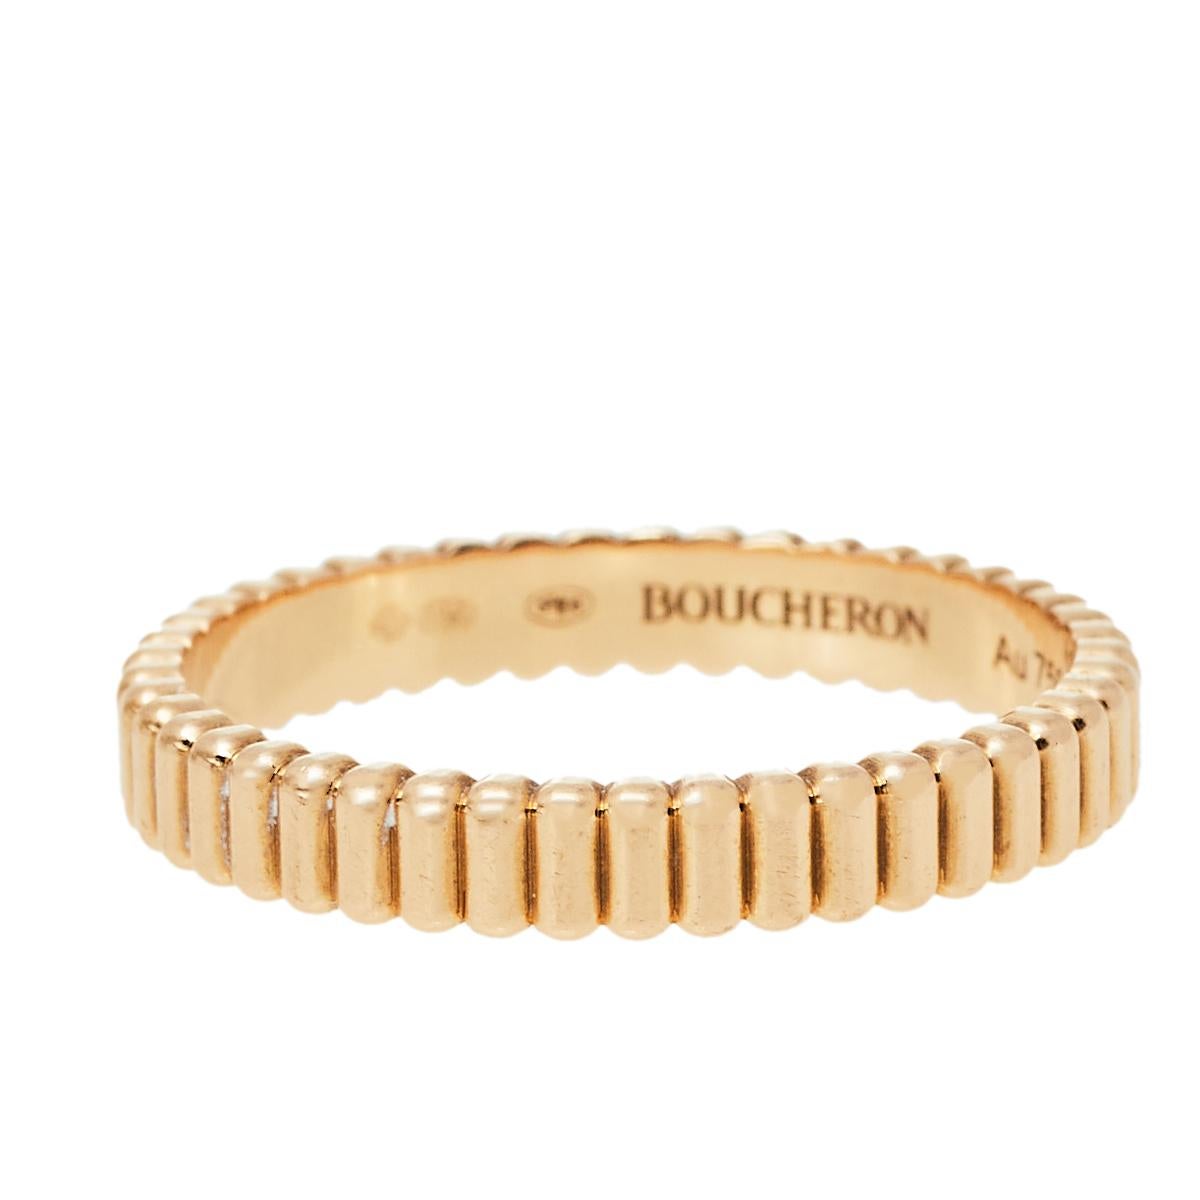 Give your wedding vows an exquisite look with this wedding band from the house of Boucheron. Designed from luxe 18k rose gold, this simple ring has a grosgrain pattern all over and a sleek look that makes for a classic appearance with your